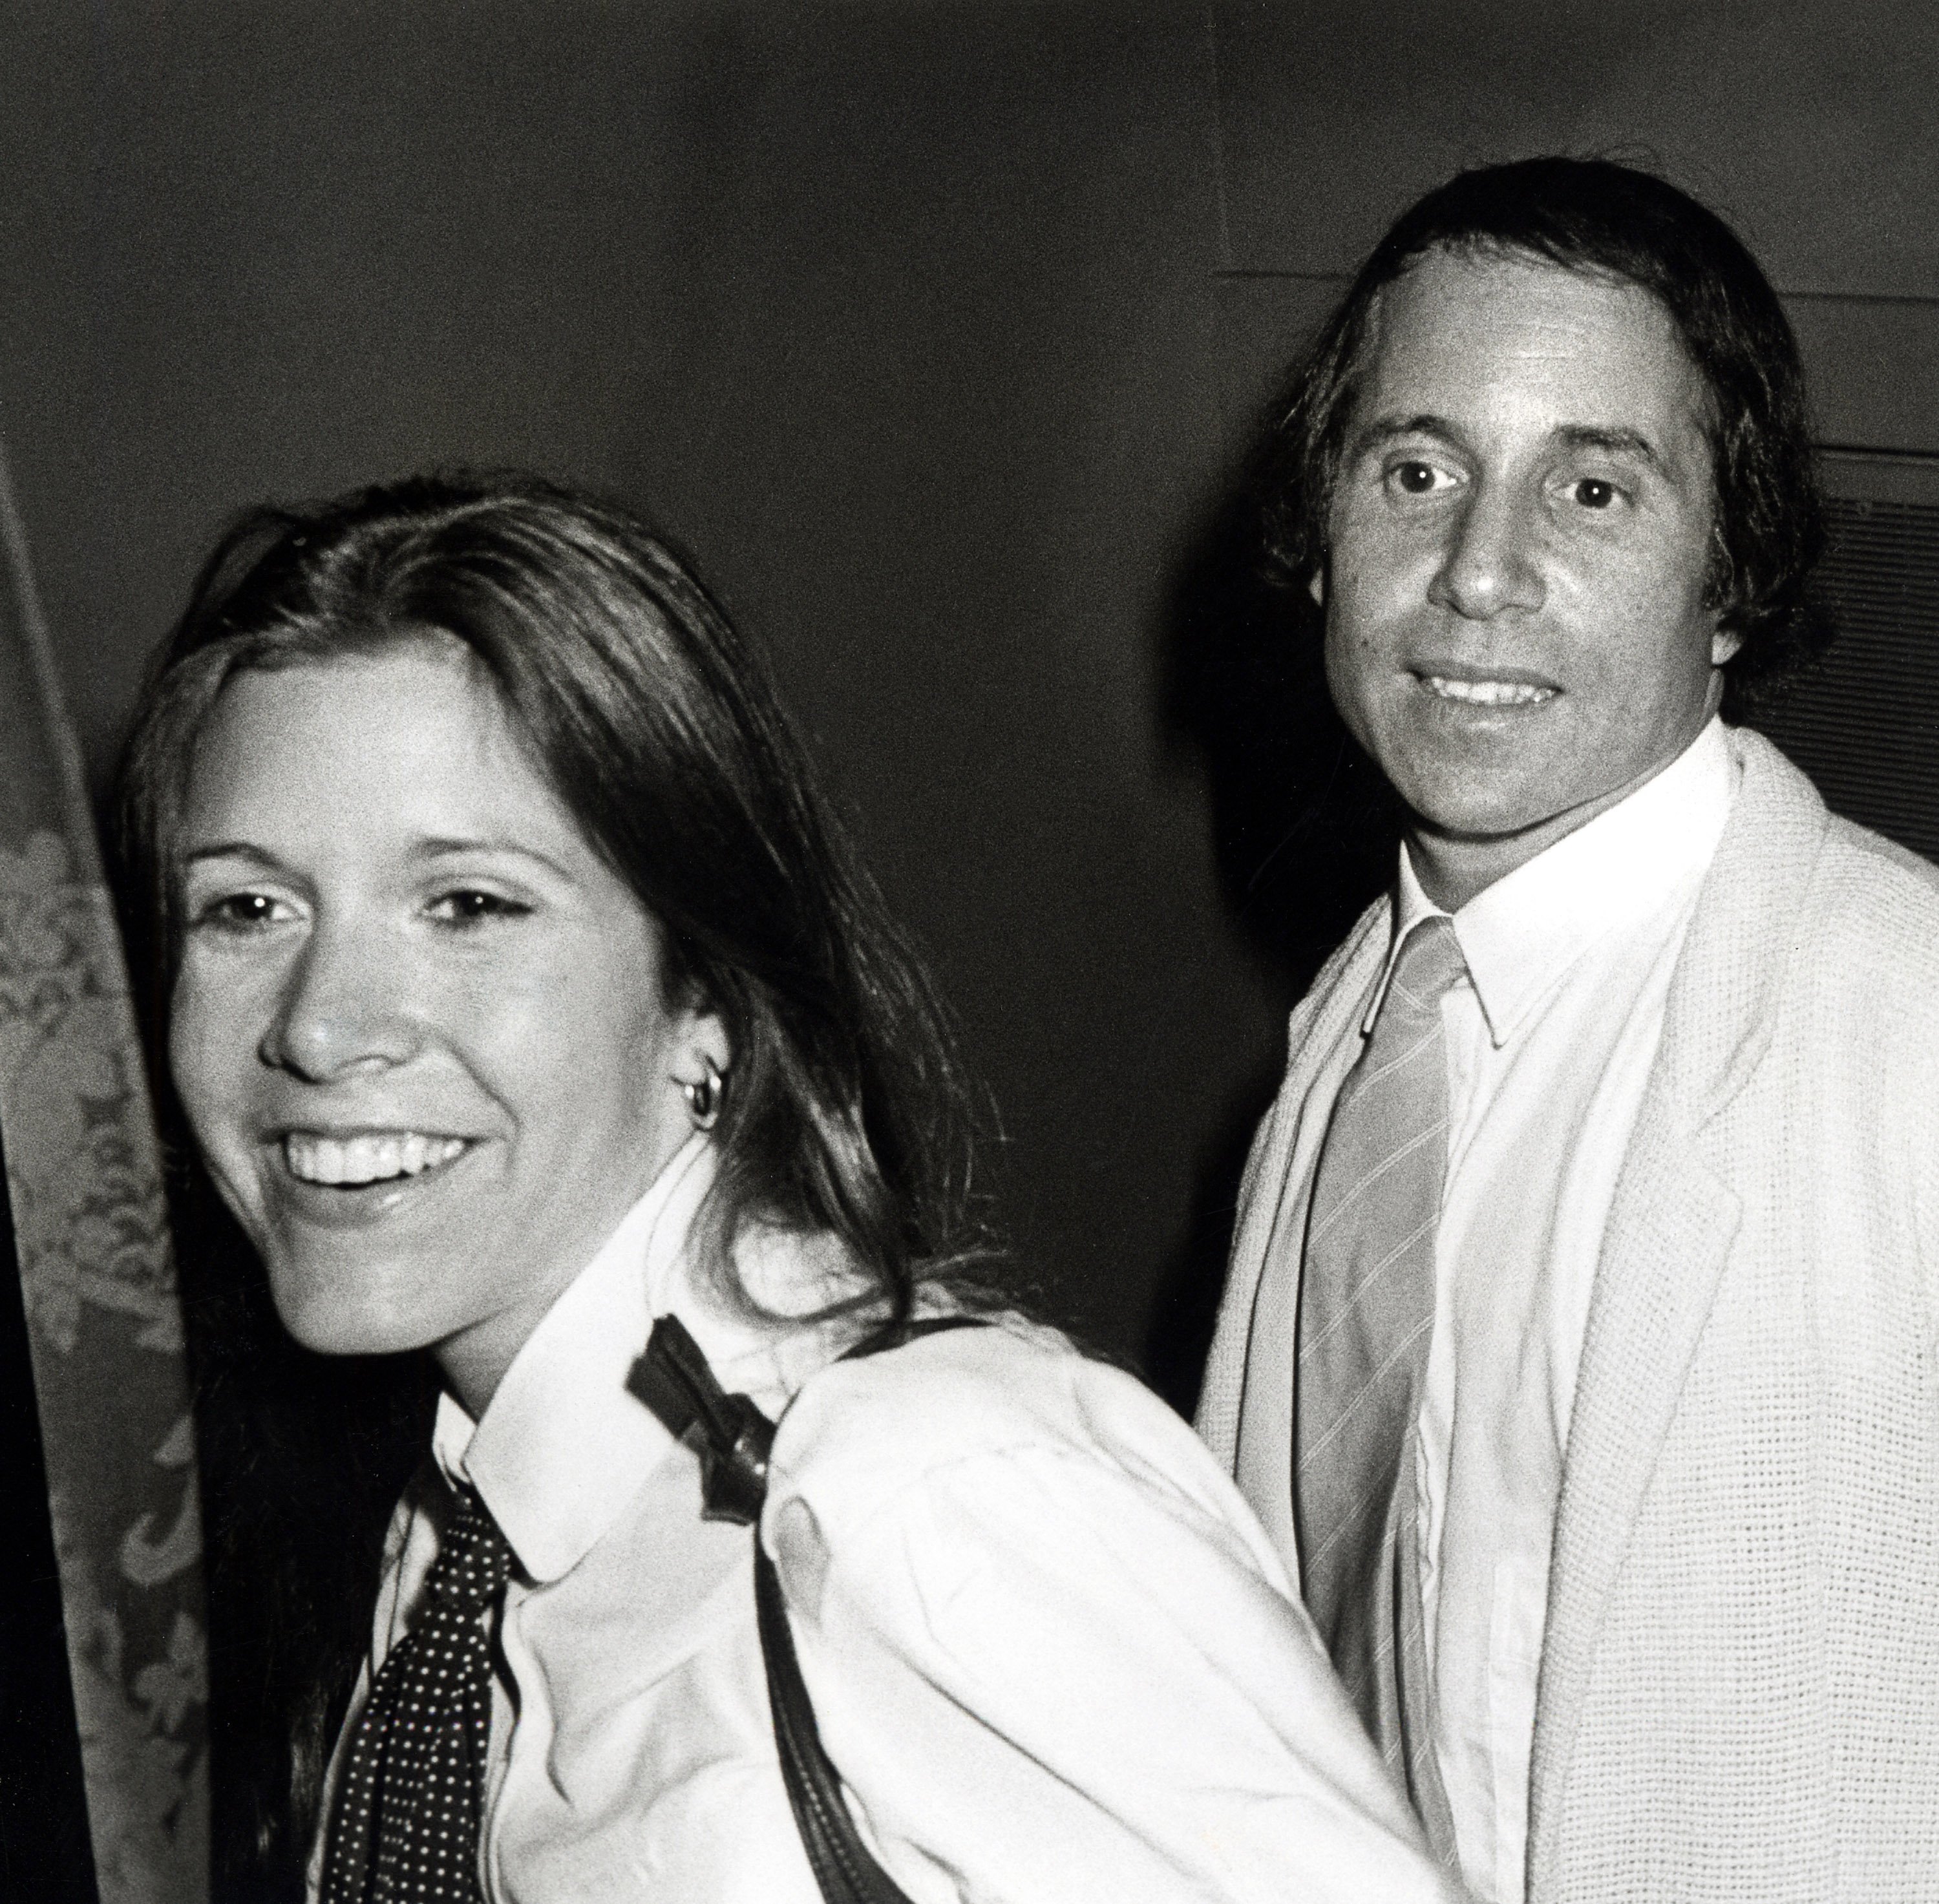 Carrie Fisher and Paul Simon during Opening of "Gilda, Live from New York" - August 2, 1979 at Winter Garden Theatre in New York City, New York, United States. 